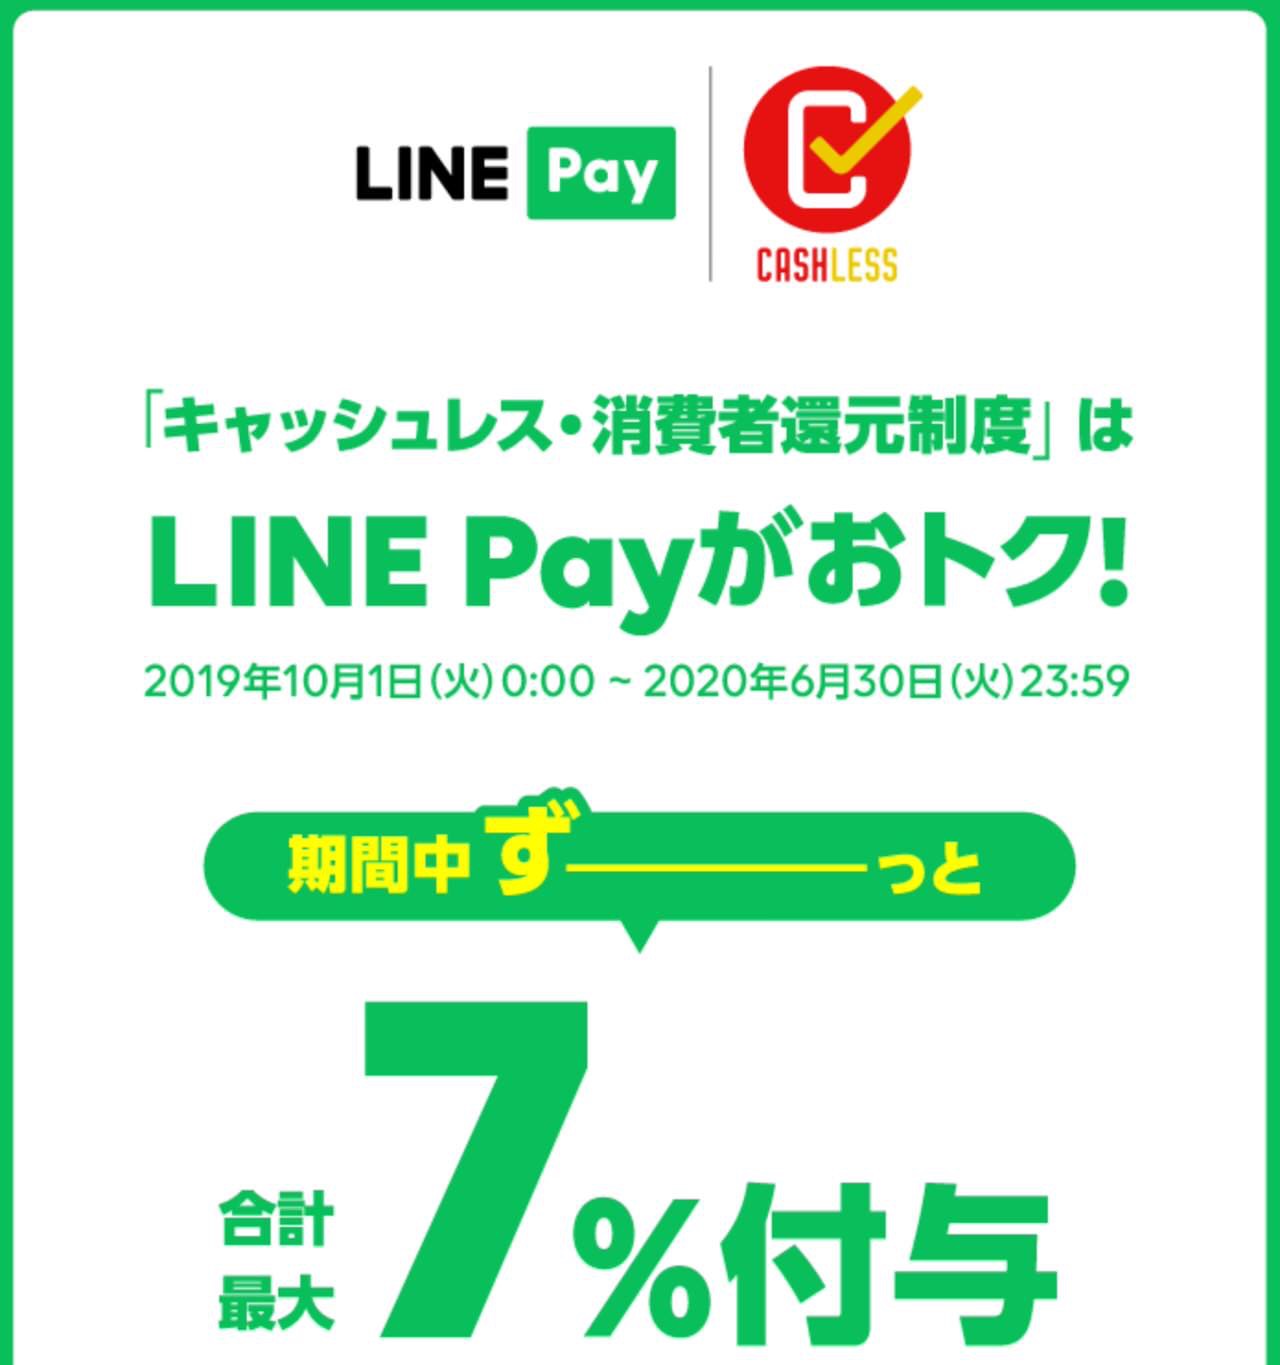 「LINE Pay」キャッシュレス・消費者還元制度は最大7%還元（10/1から）